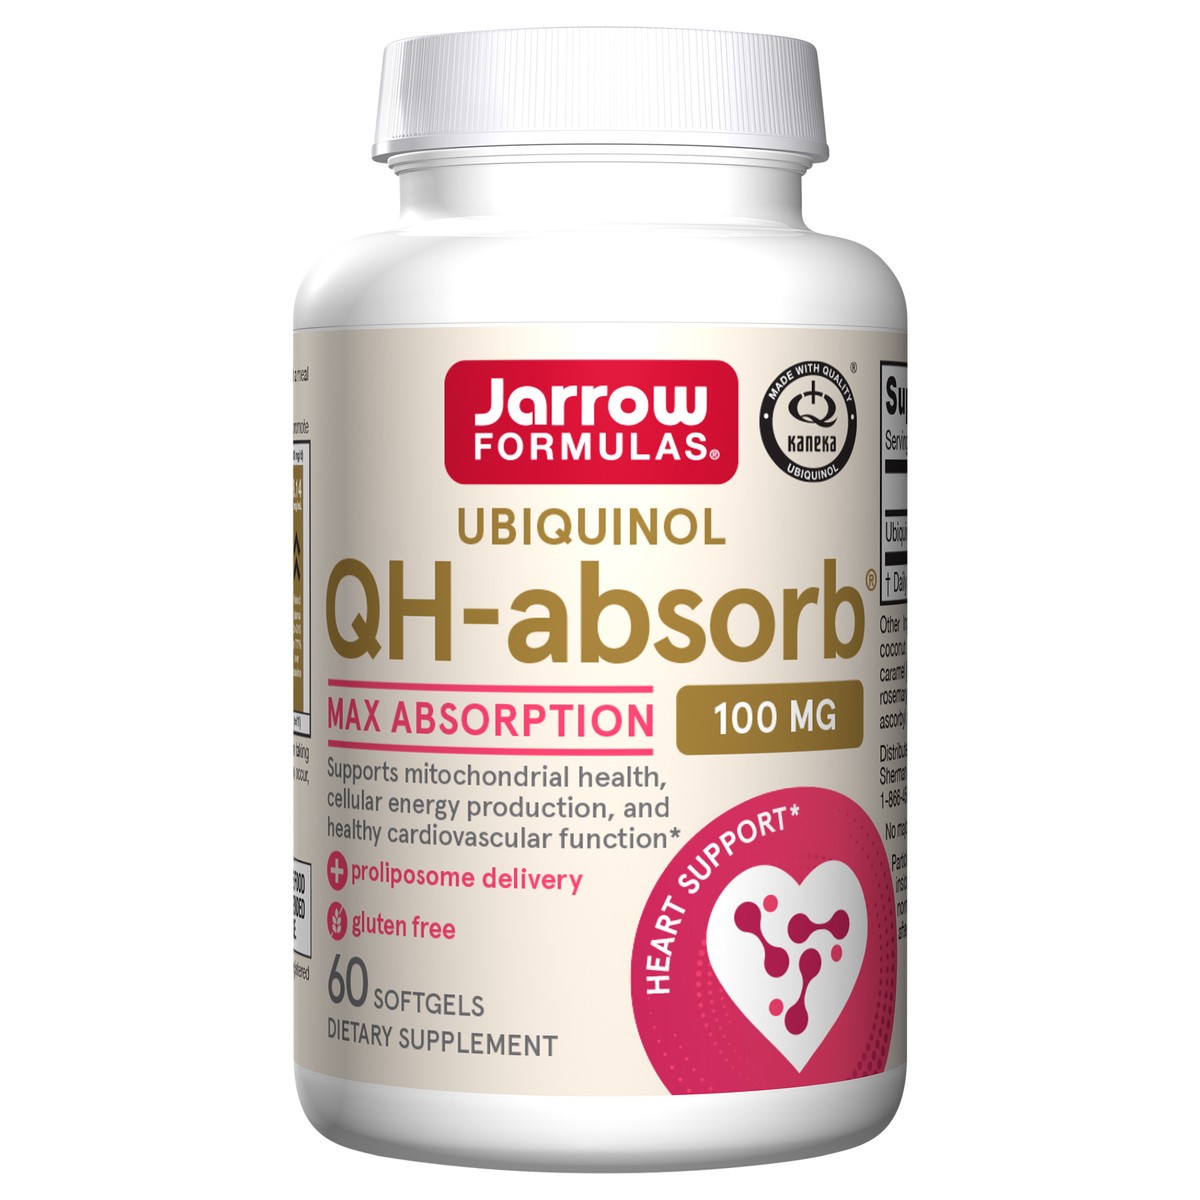 slide 1 of 4, Jarrow Formulas QH-absorb 100 mg Max Absorption - Ubiquinol - Dietary Supplement - Supports Mitochondrial Health, Cellular Energy Production & Cardiovascular Function - Up to 60 Servings (Softgels), 60 ct